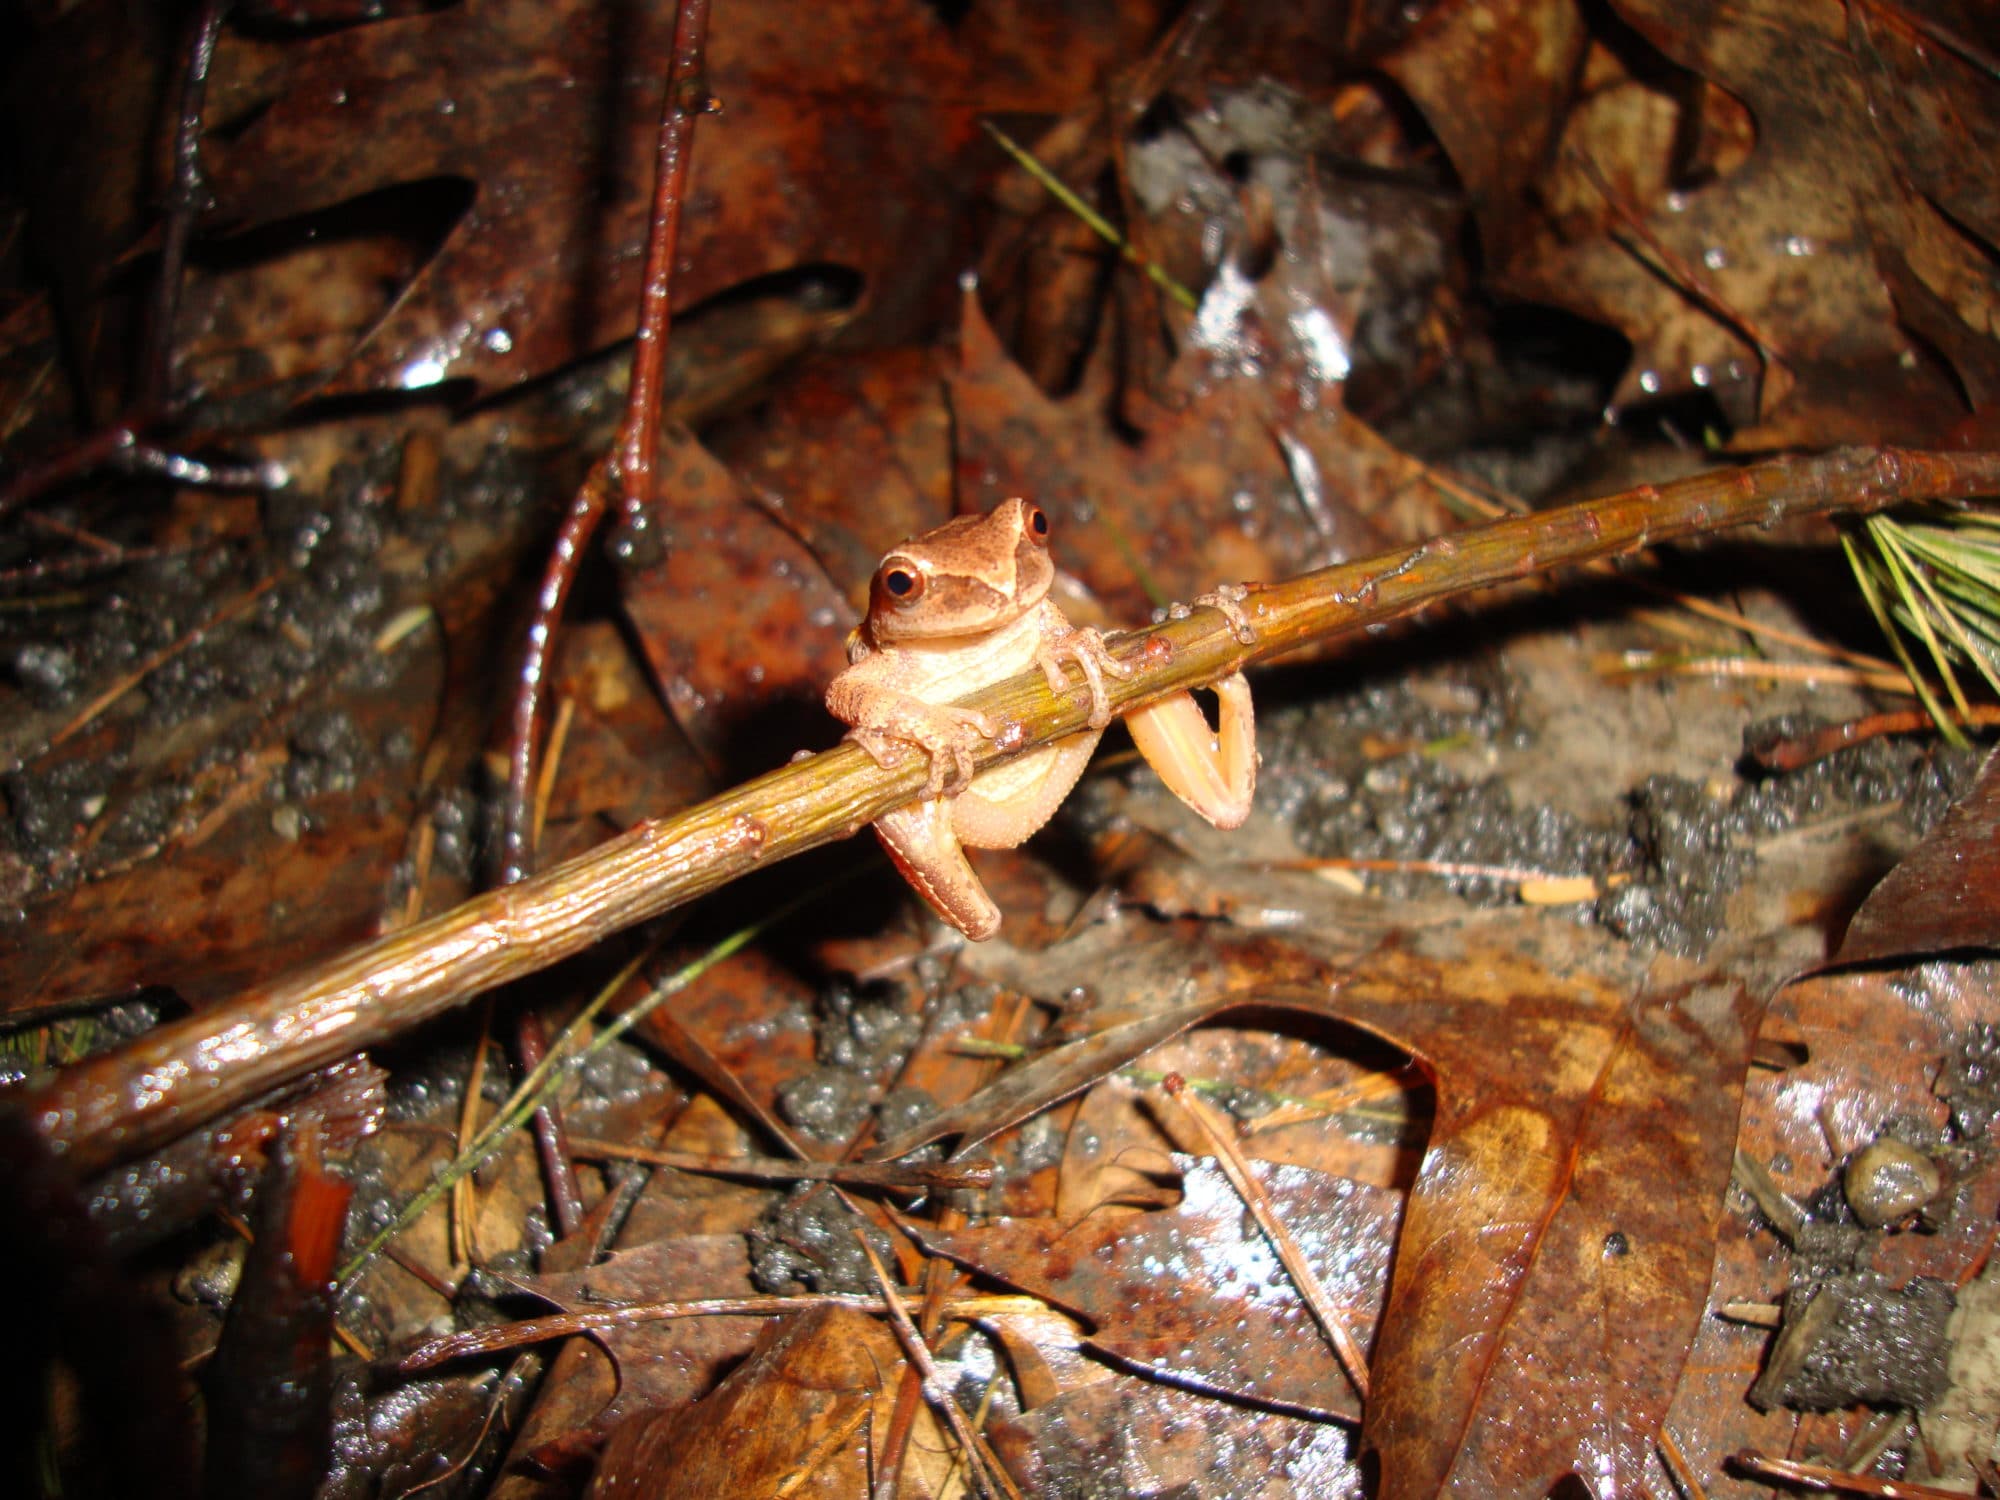 A spring peeper clings to a branch. (photo © Kevin Pearson)